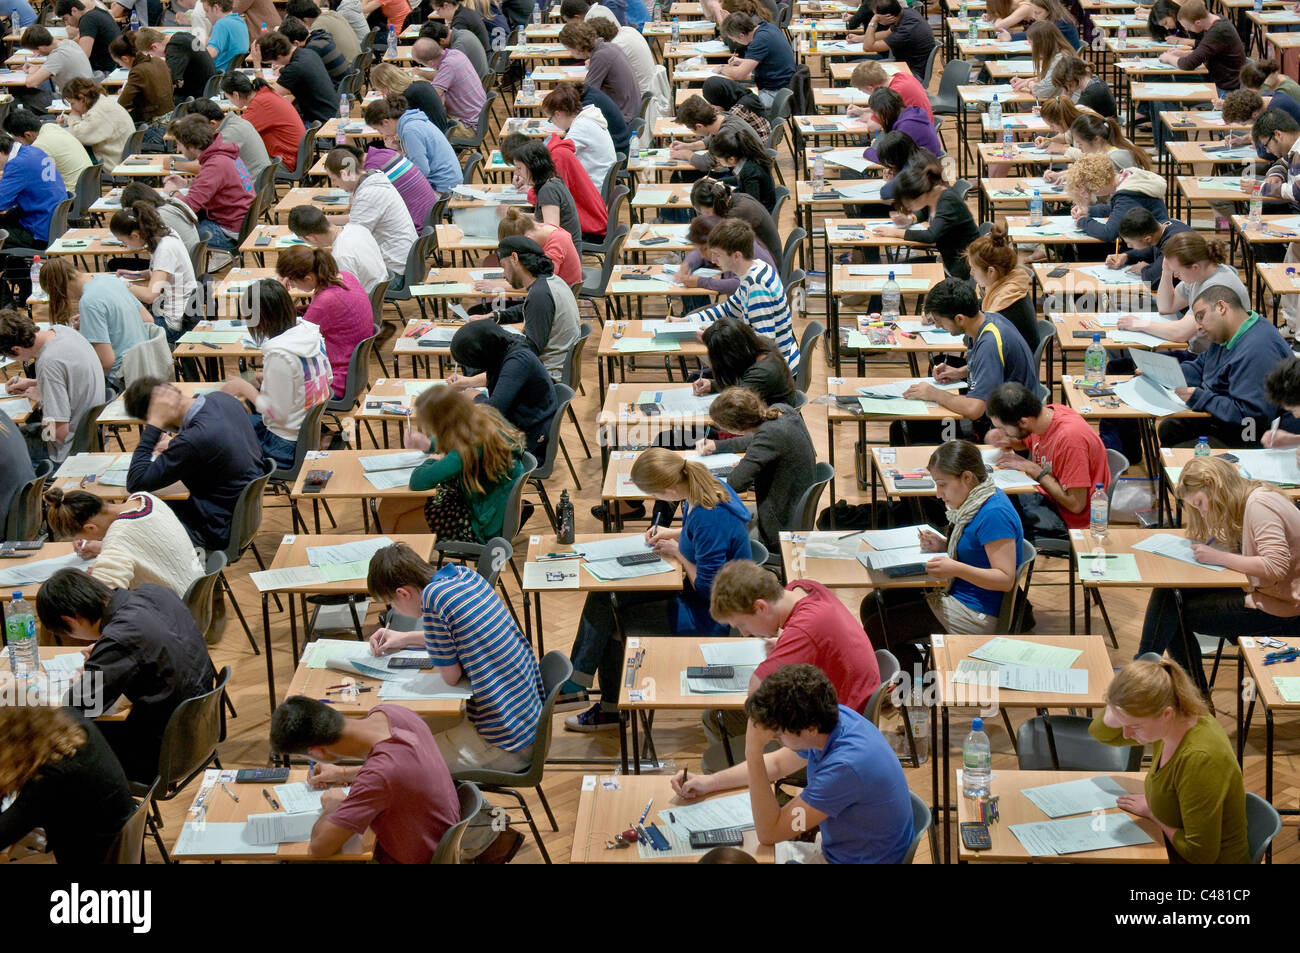 University students from King's College London, sitting exams. Stock Photo